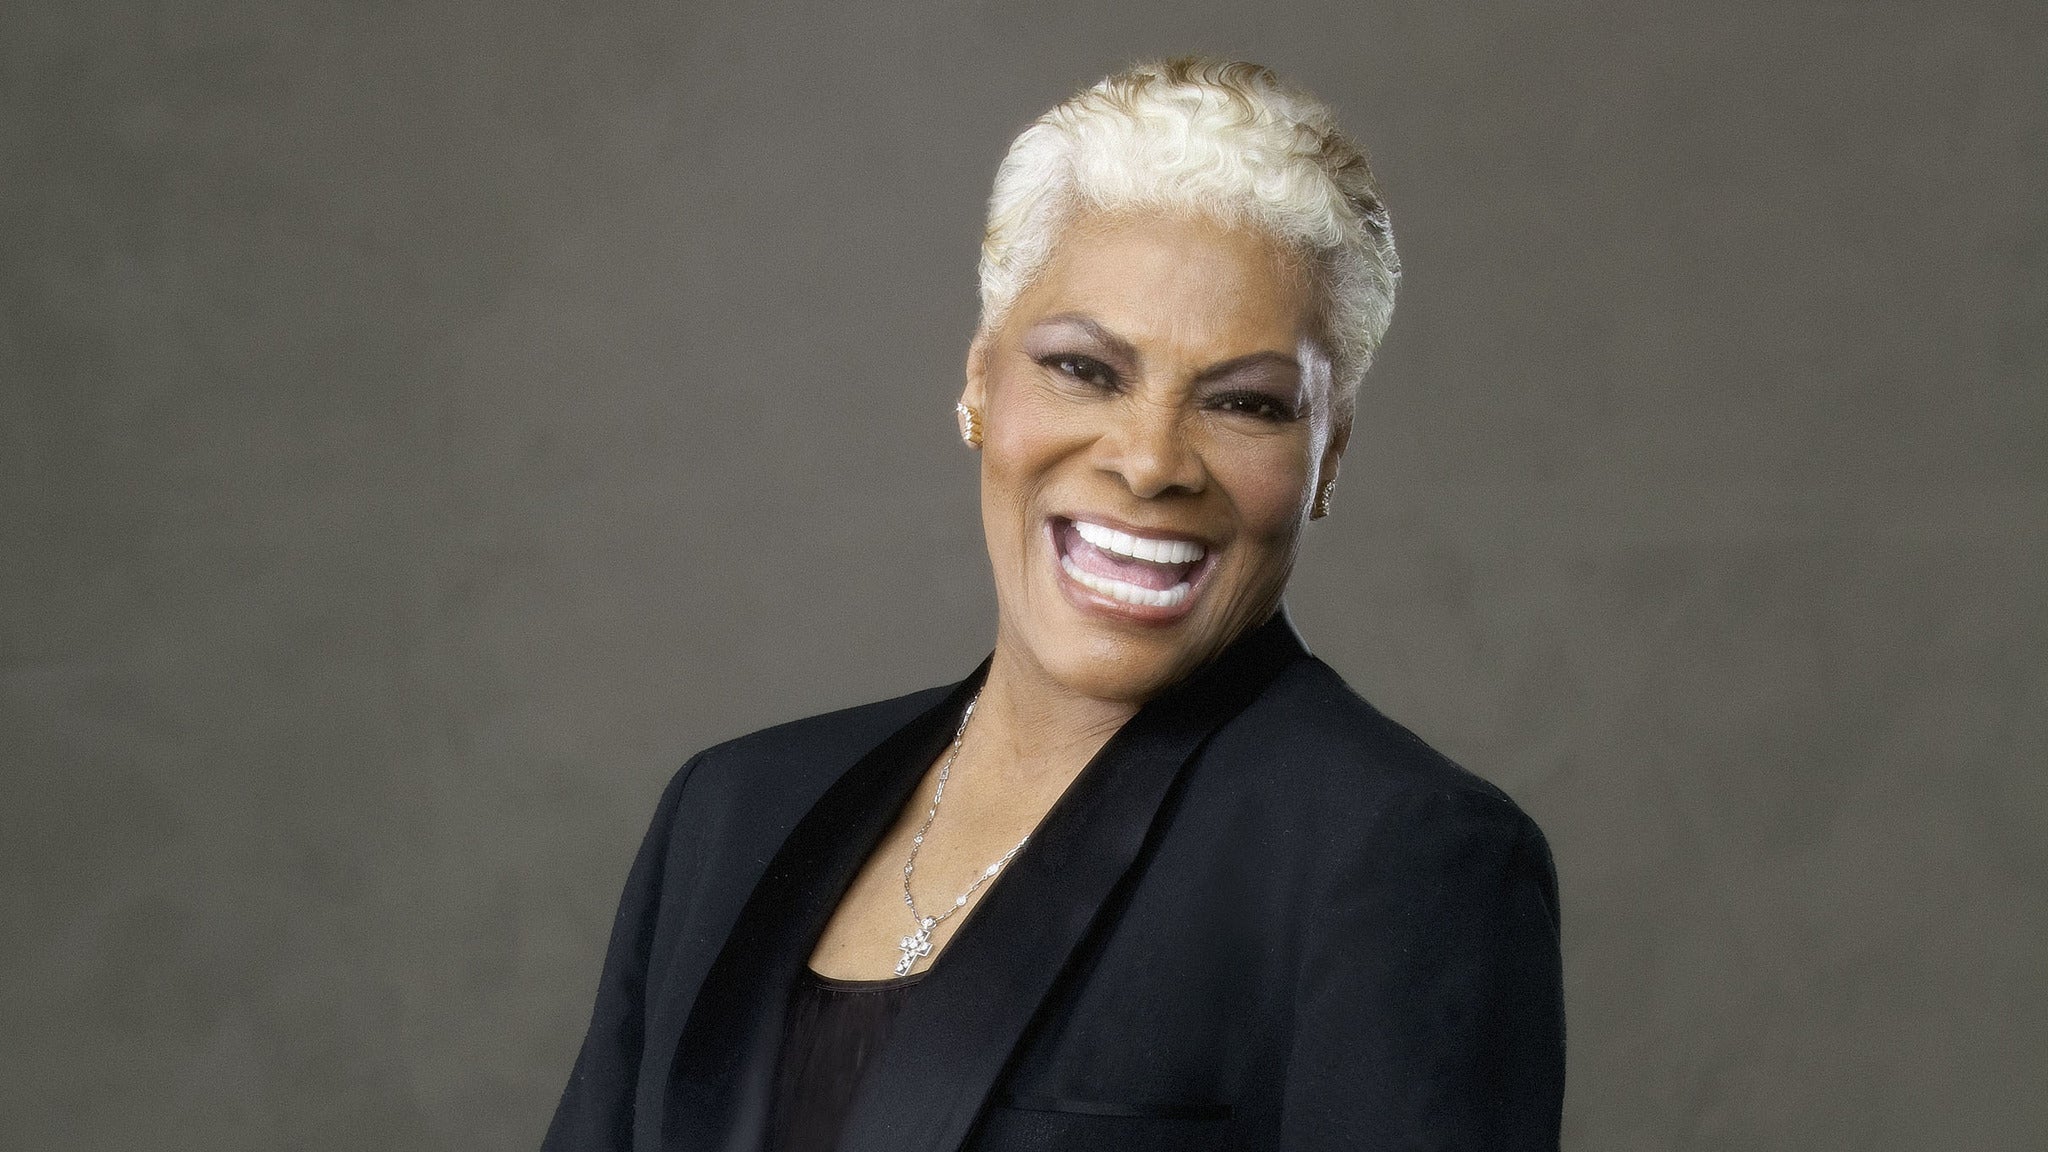 Dionne Warwick at Bally's Event Center